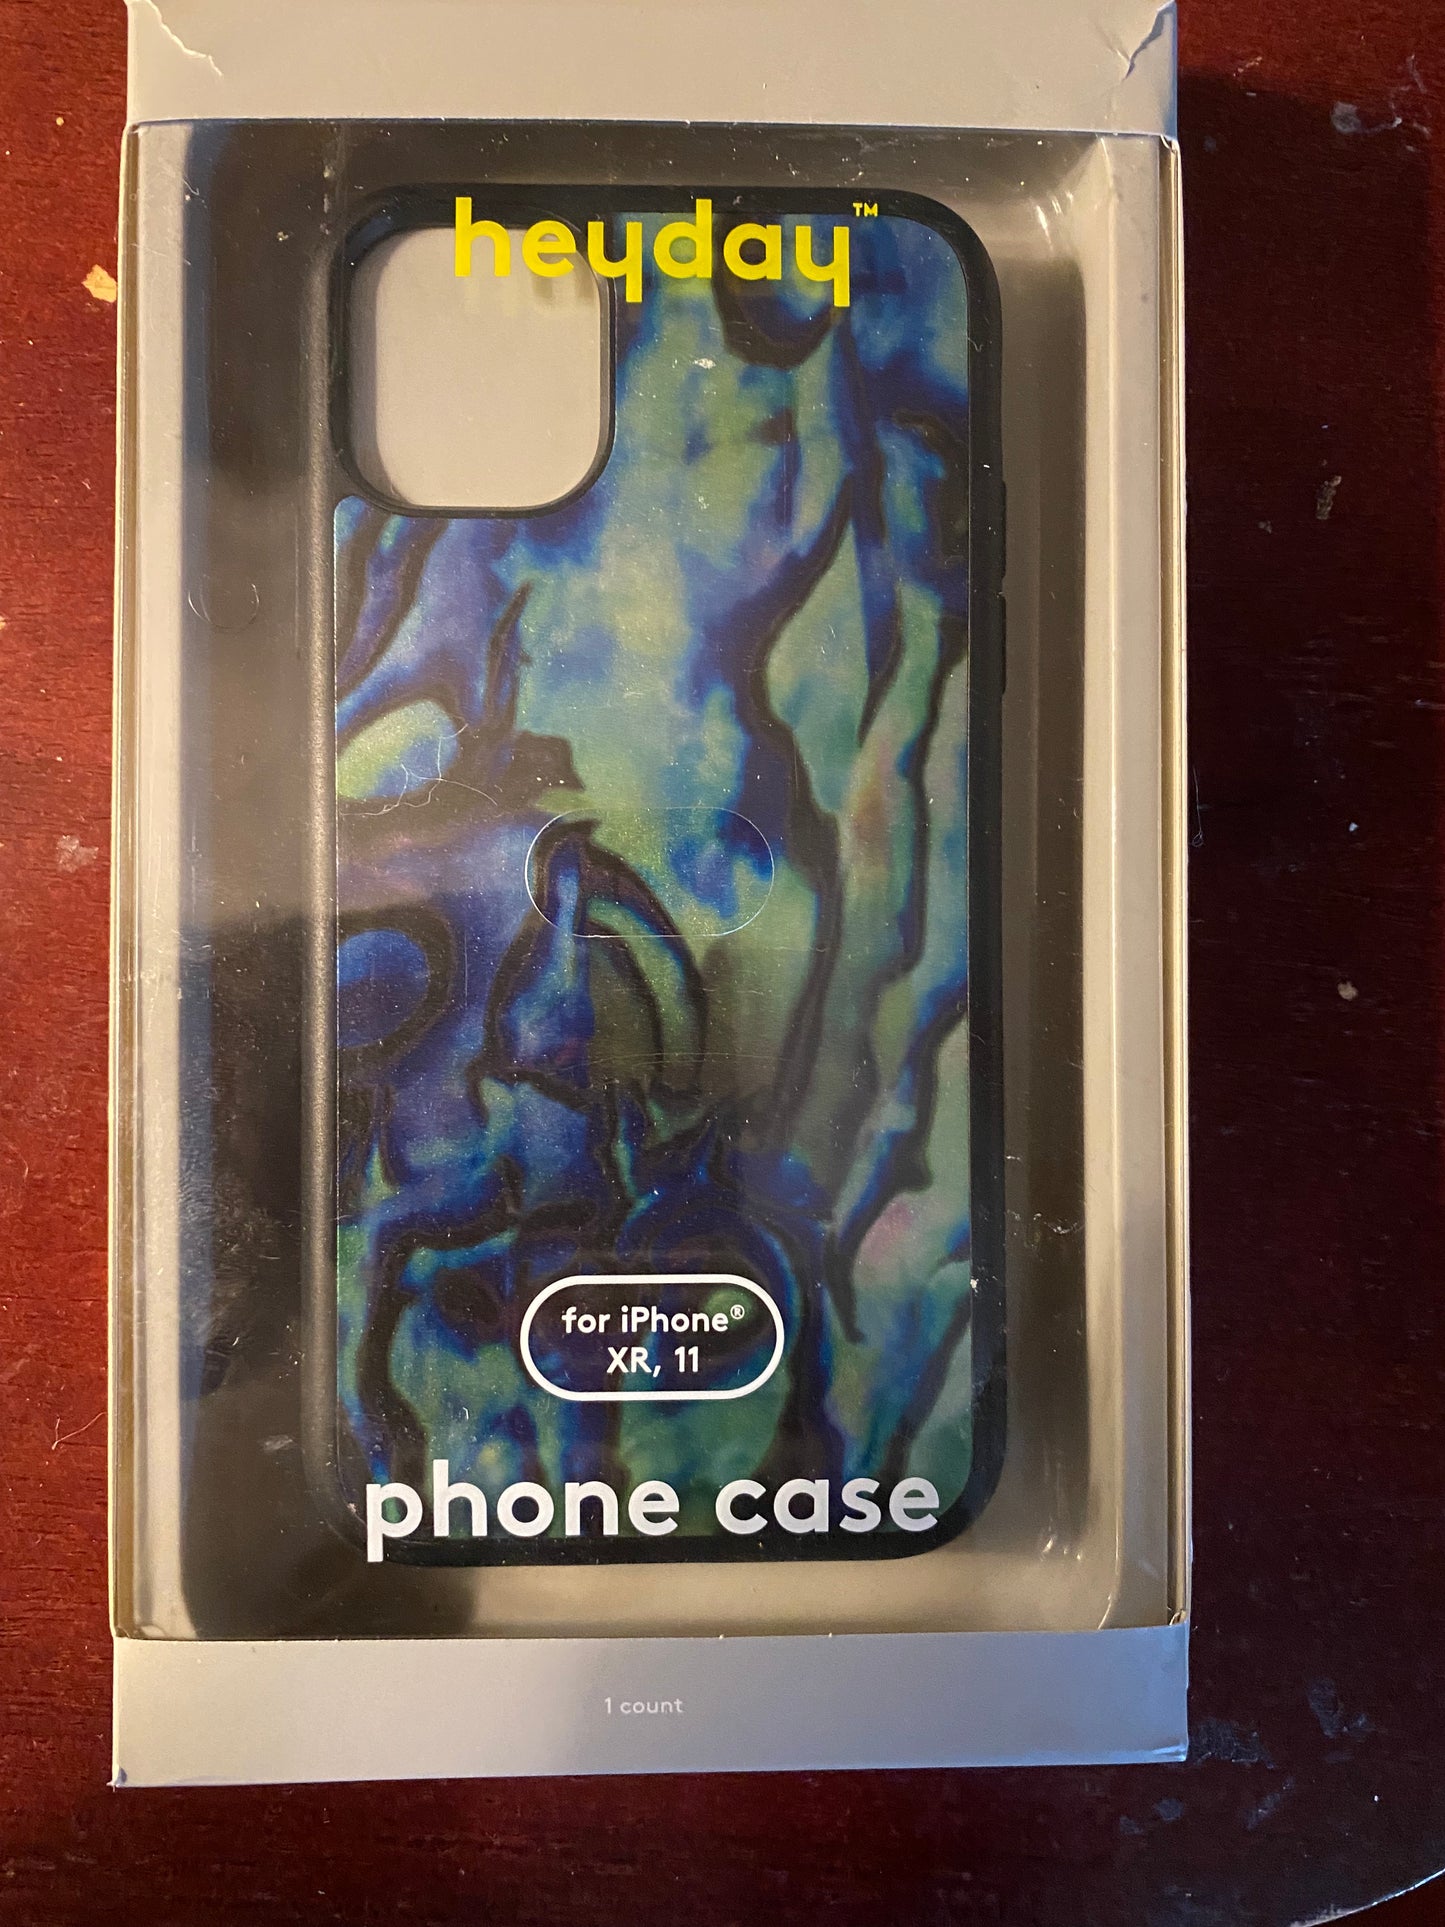 Heyday Phone Case for iPhone XR & 11 063 - New. Open Box